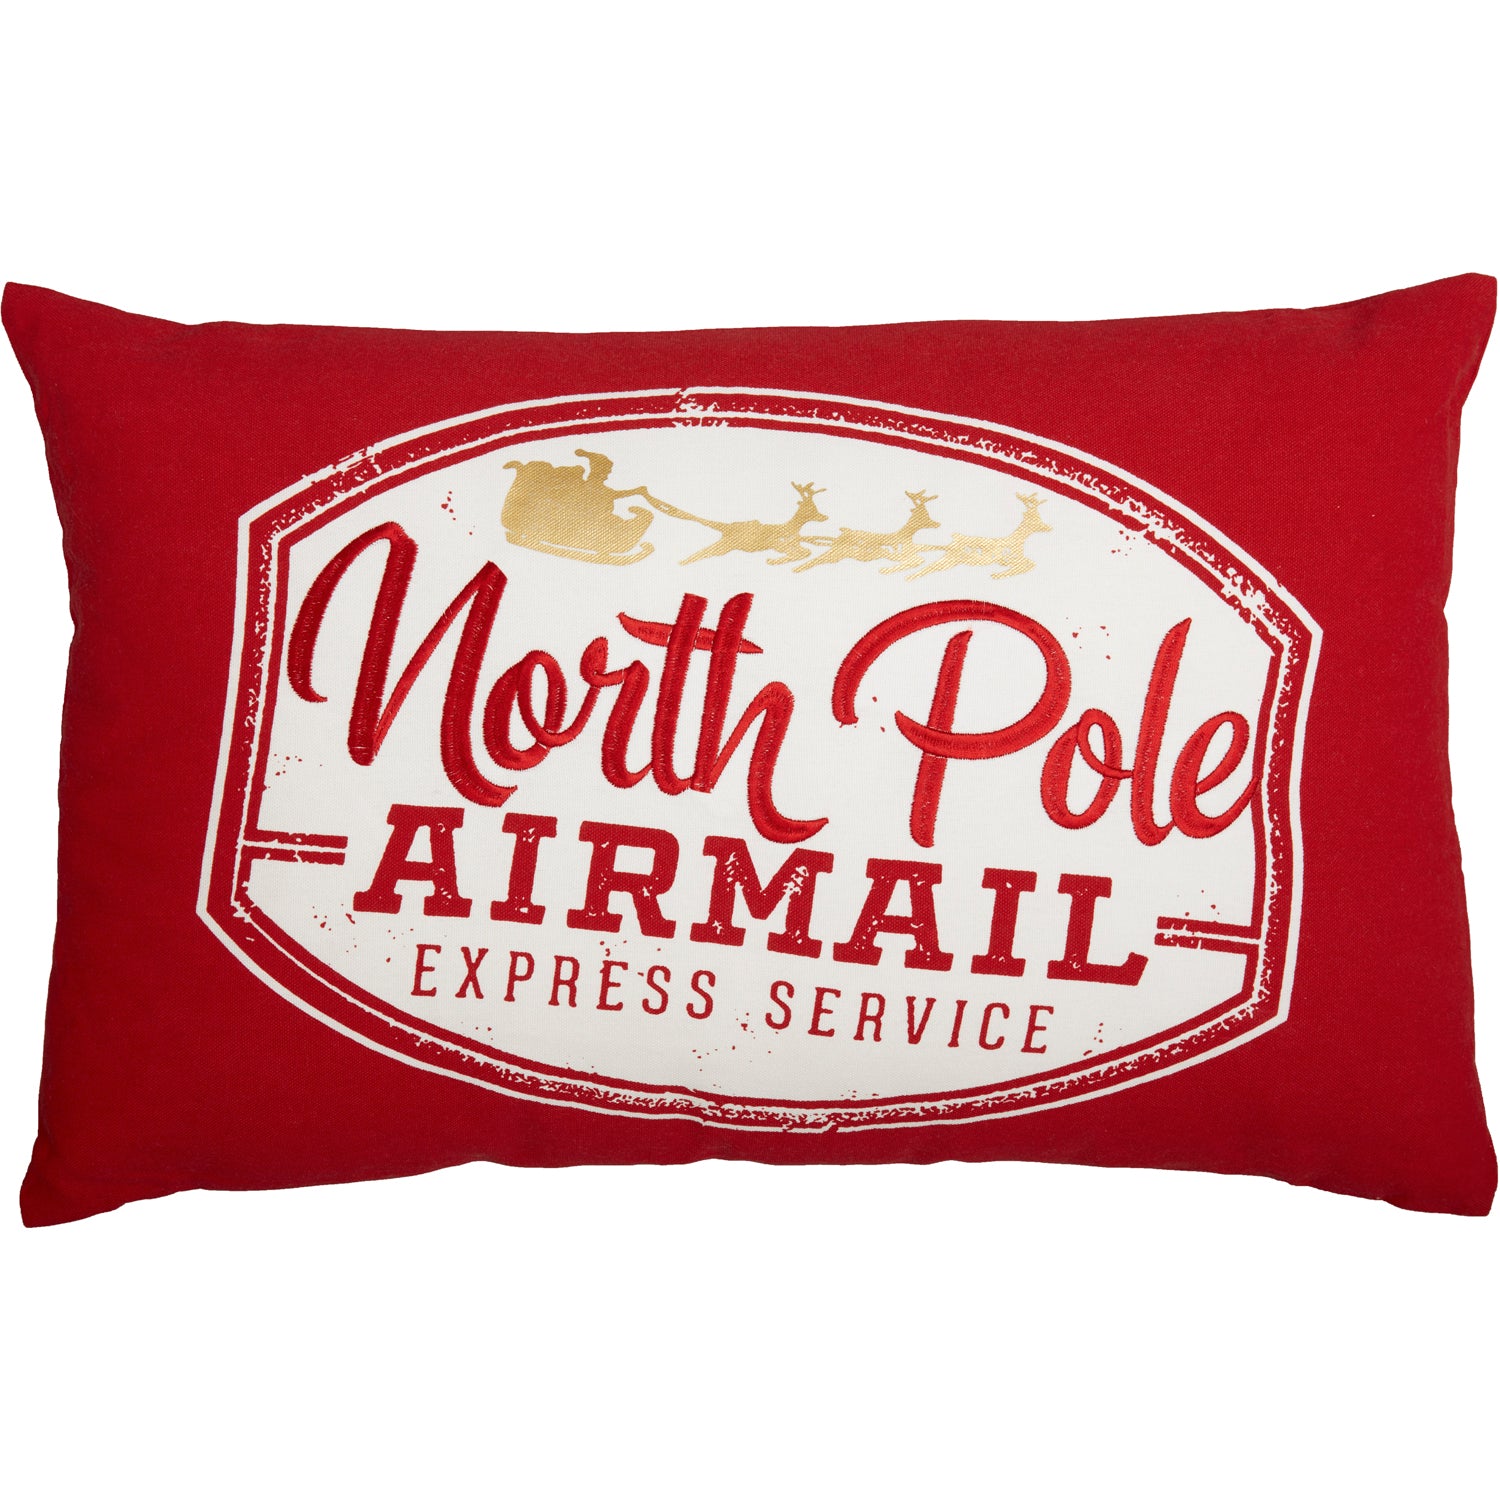 North Pole Trading Co. Merry Christmas Square Throw Pillow